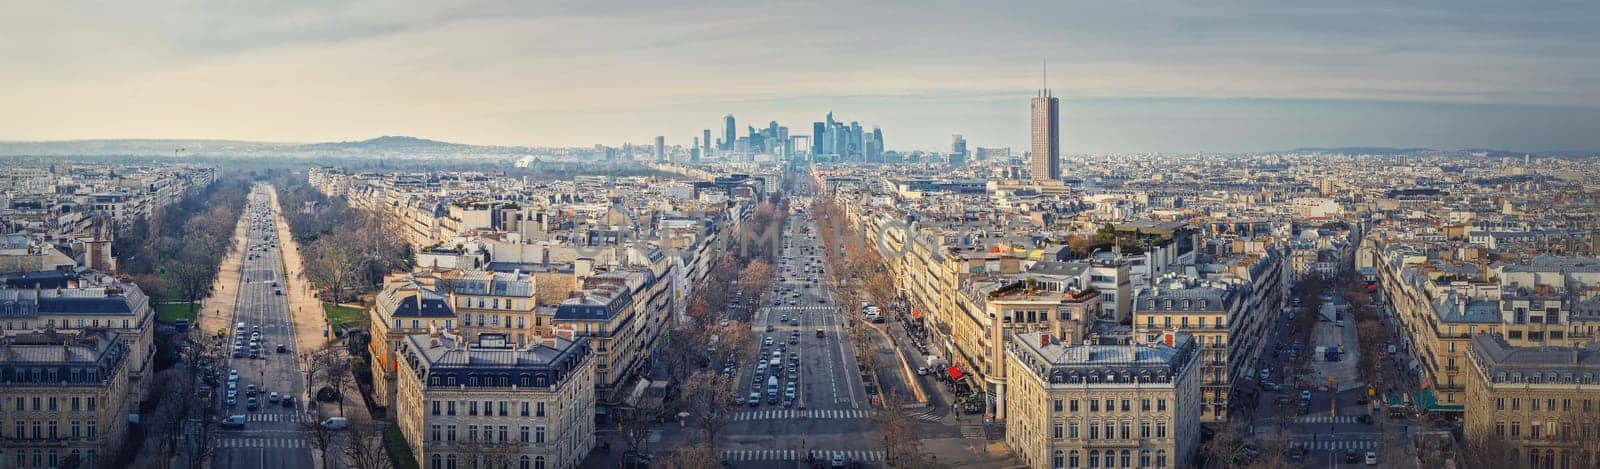 Aerial Paris cityscape panorama with view to La Defense metropolitan district, France. Champs-Elysee avenue, beautiful parisian architecture, historic buildings and landmarks on the horizon